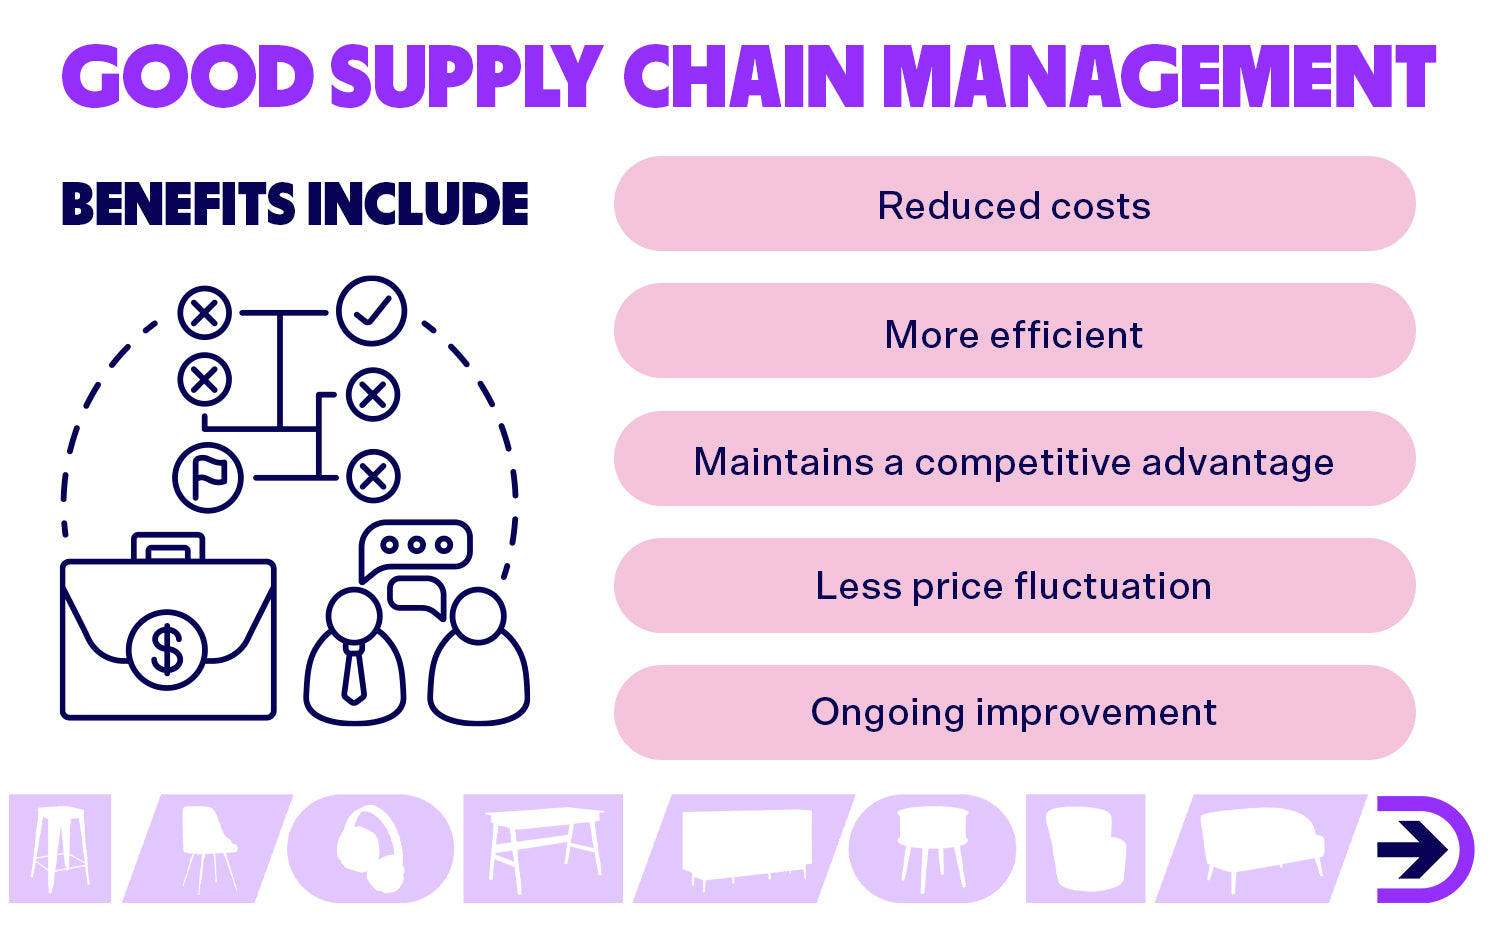 Good supply chain management can lead to reduced costs and high efficiency.